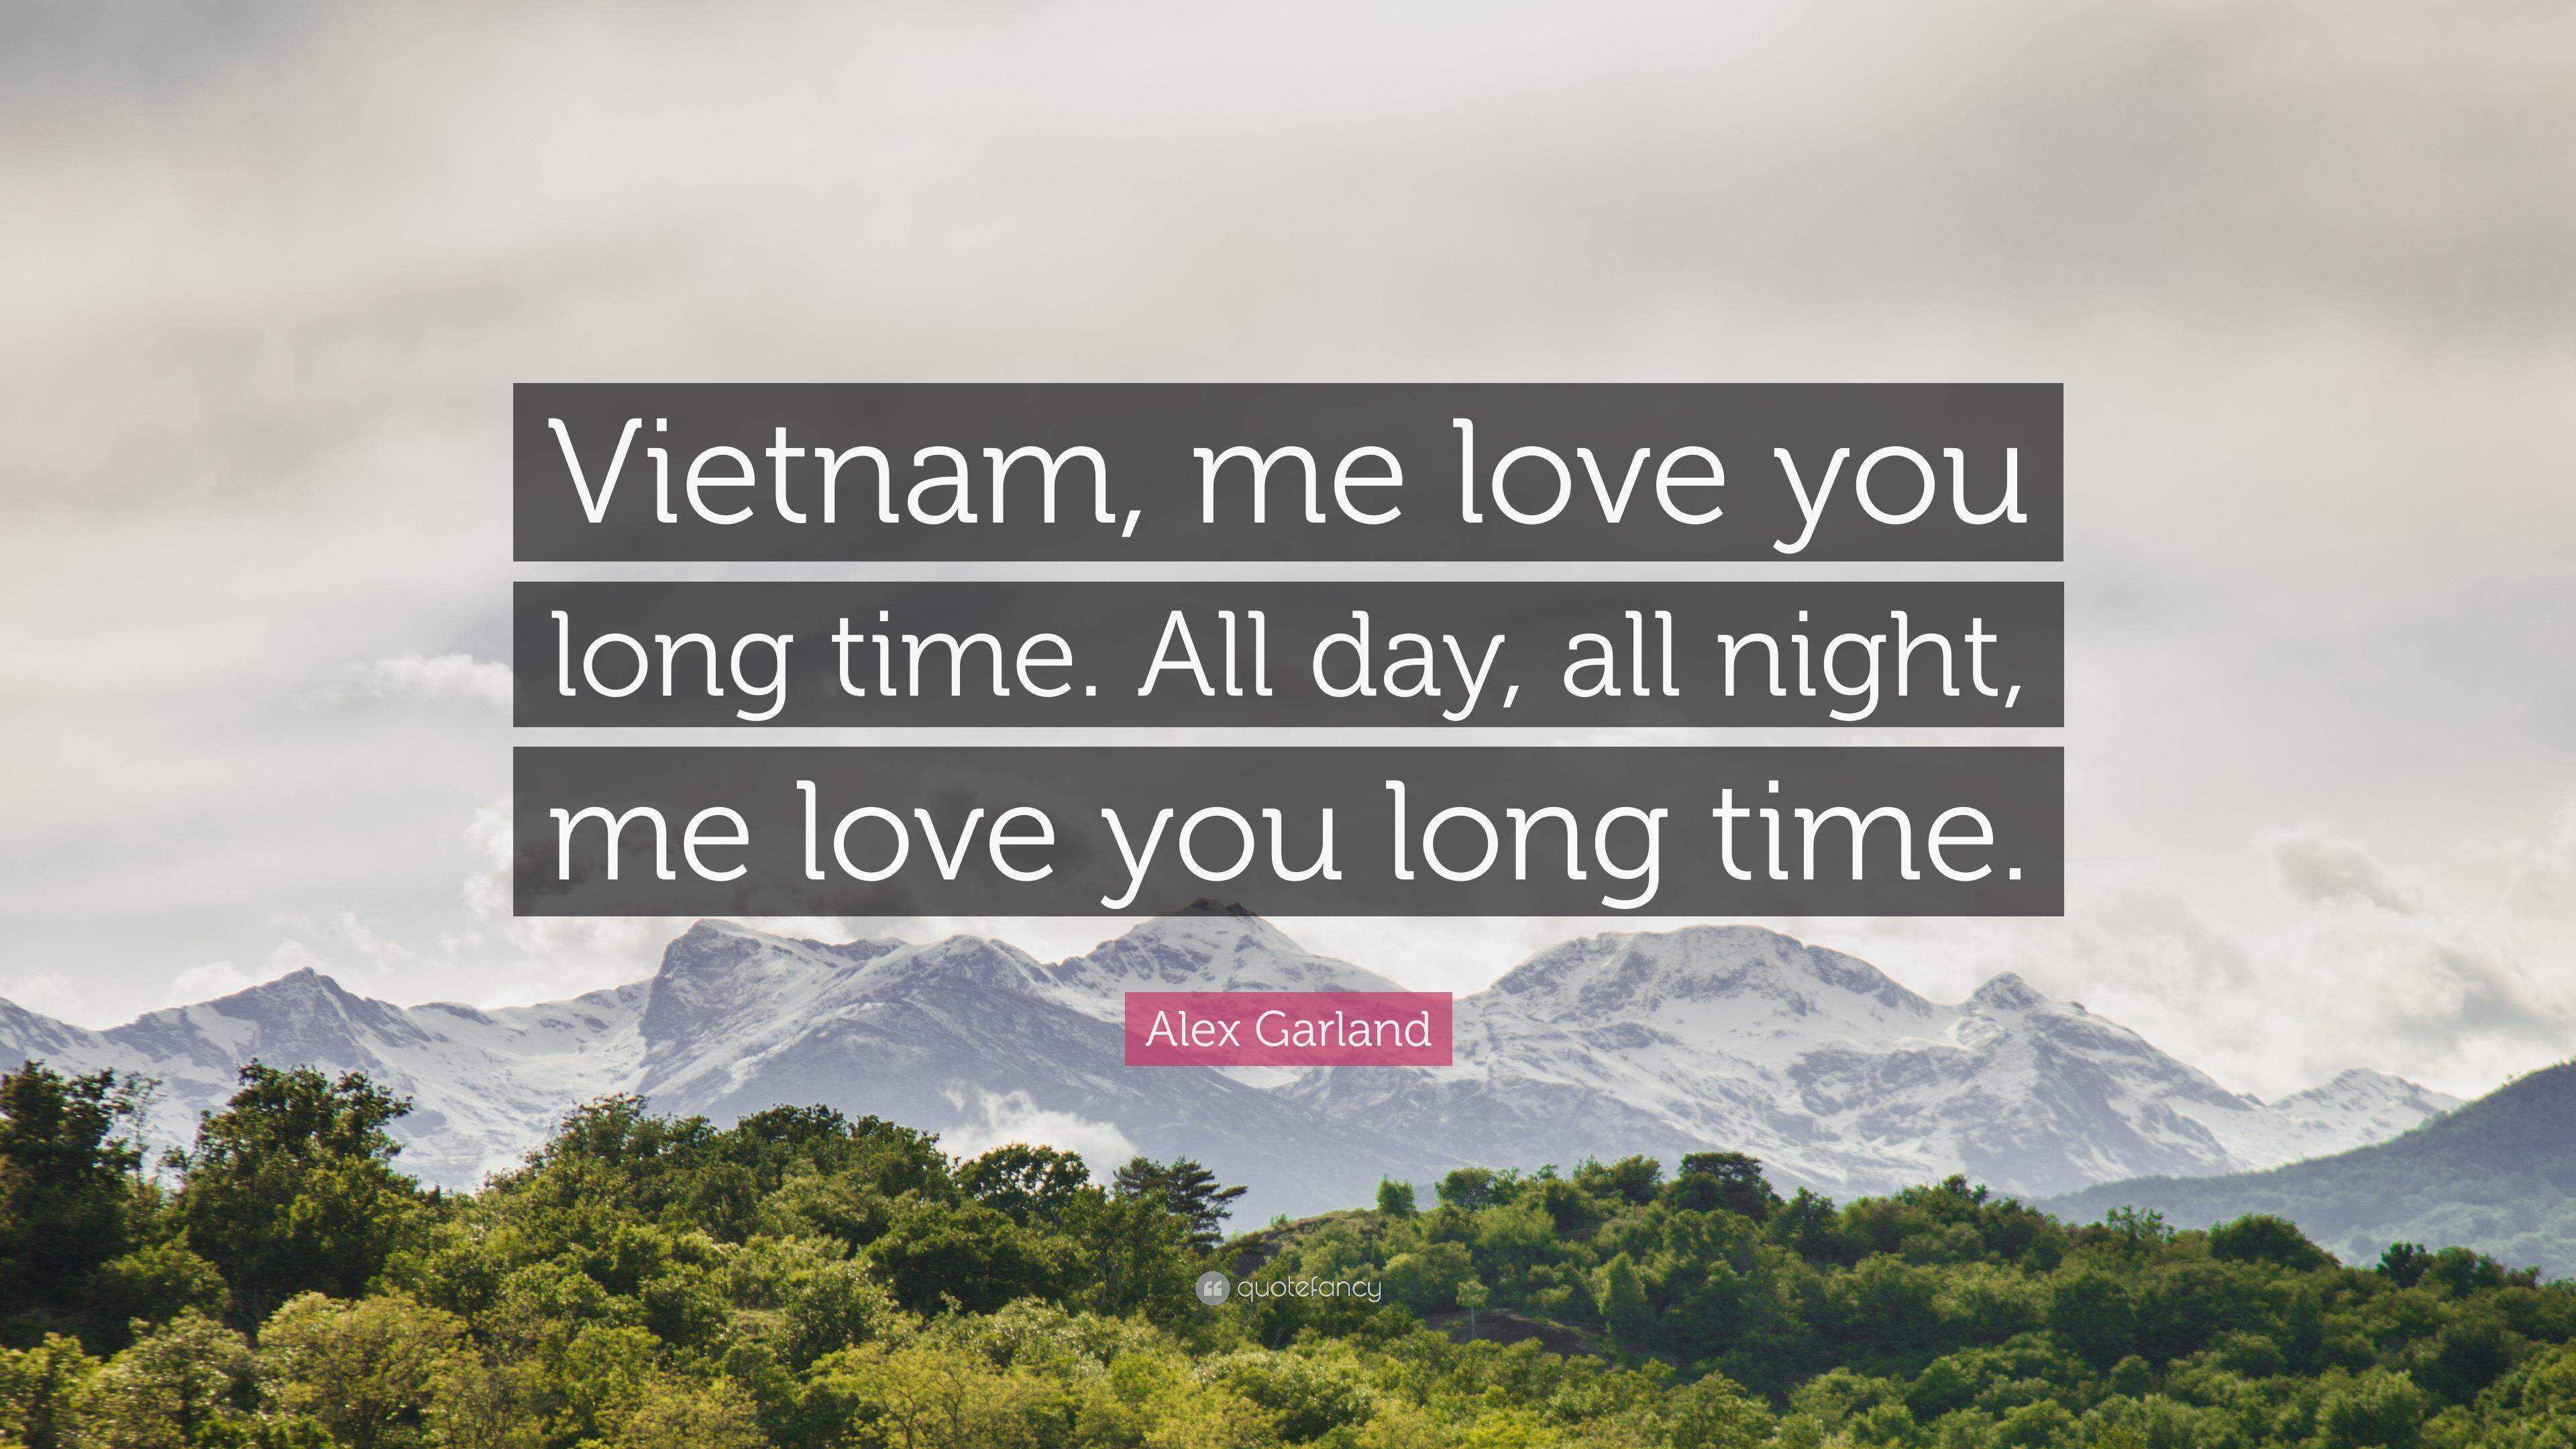 Alex Garland Quote “Vietnam me love you long time All day